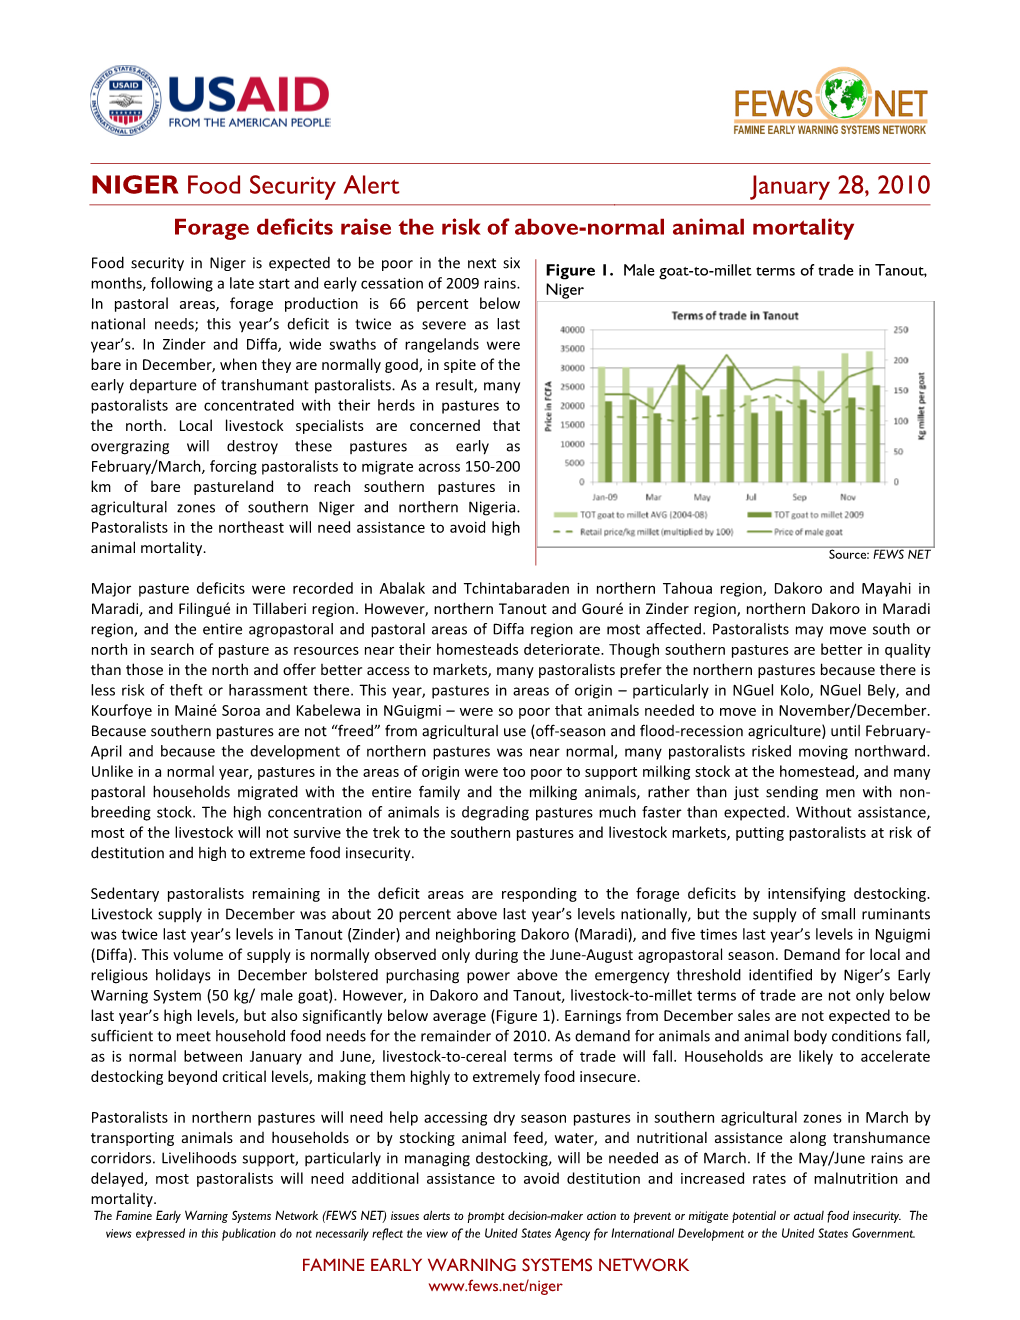 NIGER Food Security Alert January 28, 2010 Forage Deficits Raise the Risk of Above-Normal Animal Mortality